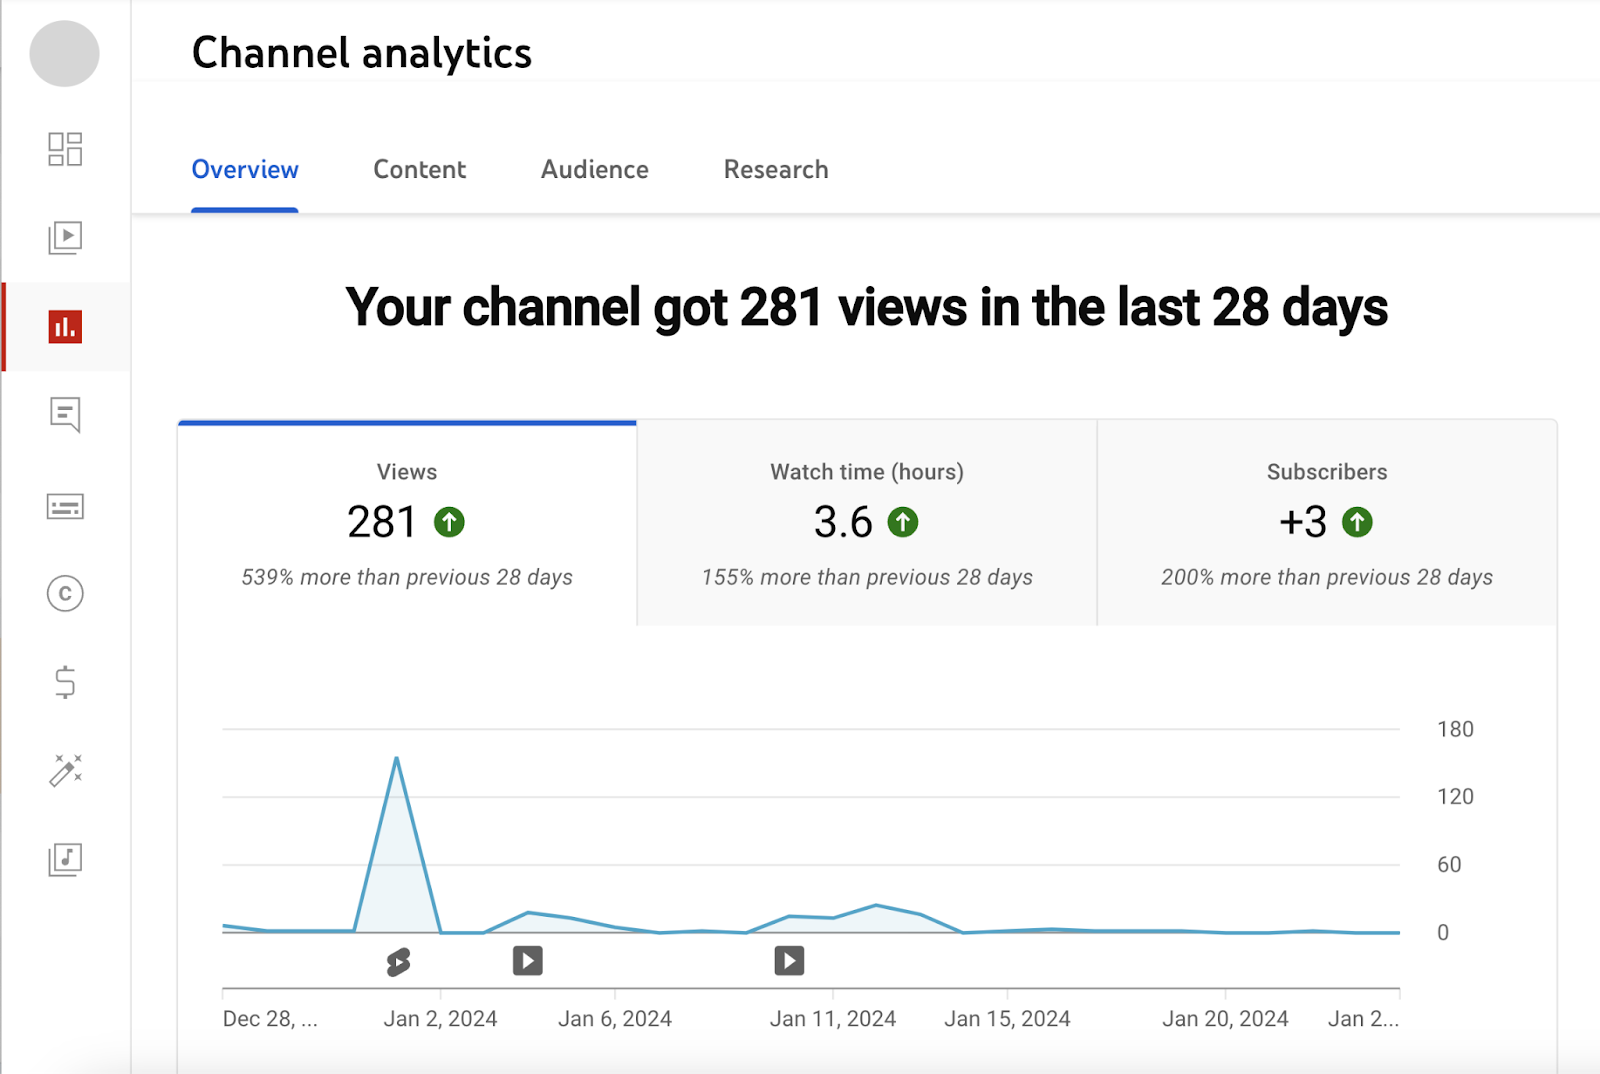 YouTube's "Channel analytics" overview page